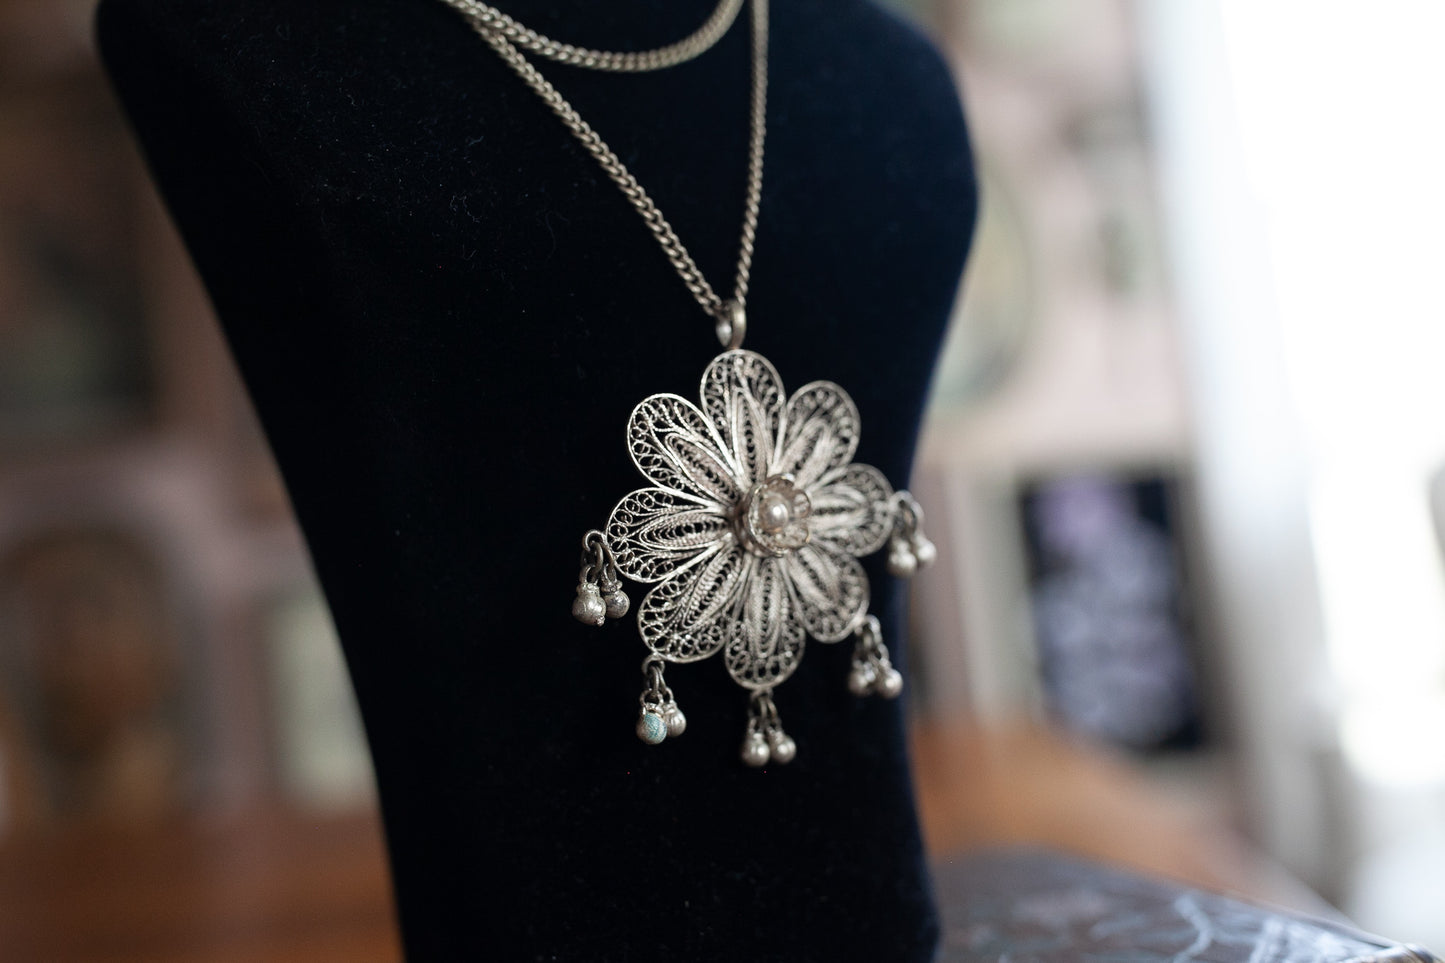 Vintage Necklace - Costume Jewelry -Flower Necklace Silver- Filigree Necklace